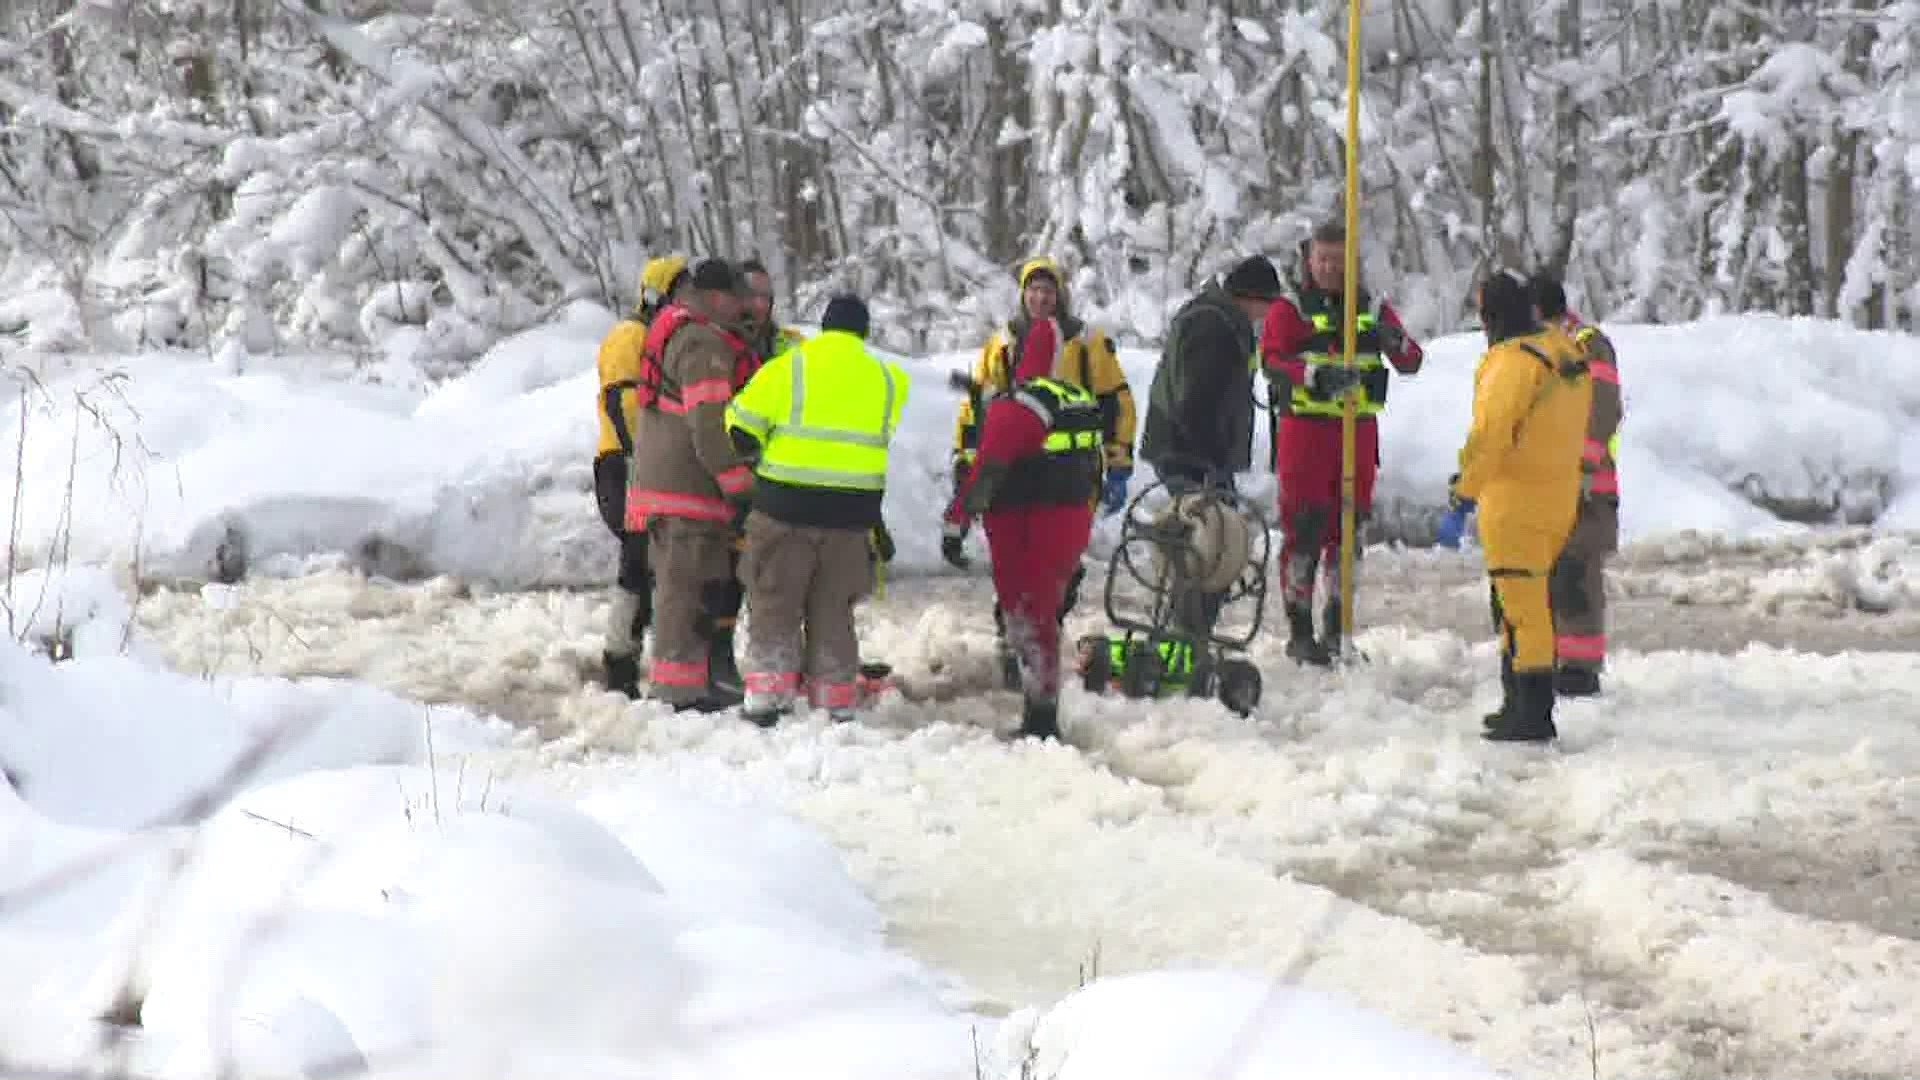 First responders saw a chilling sight: A large hole in the ice surrounded by fishing equipment, but no fisherman in view.